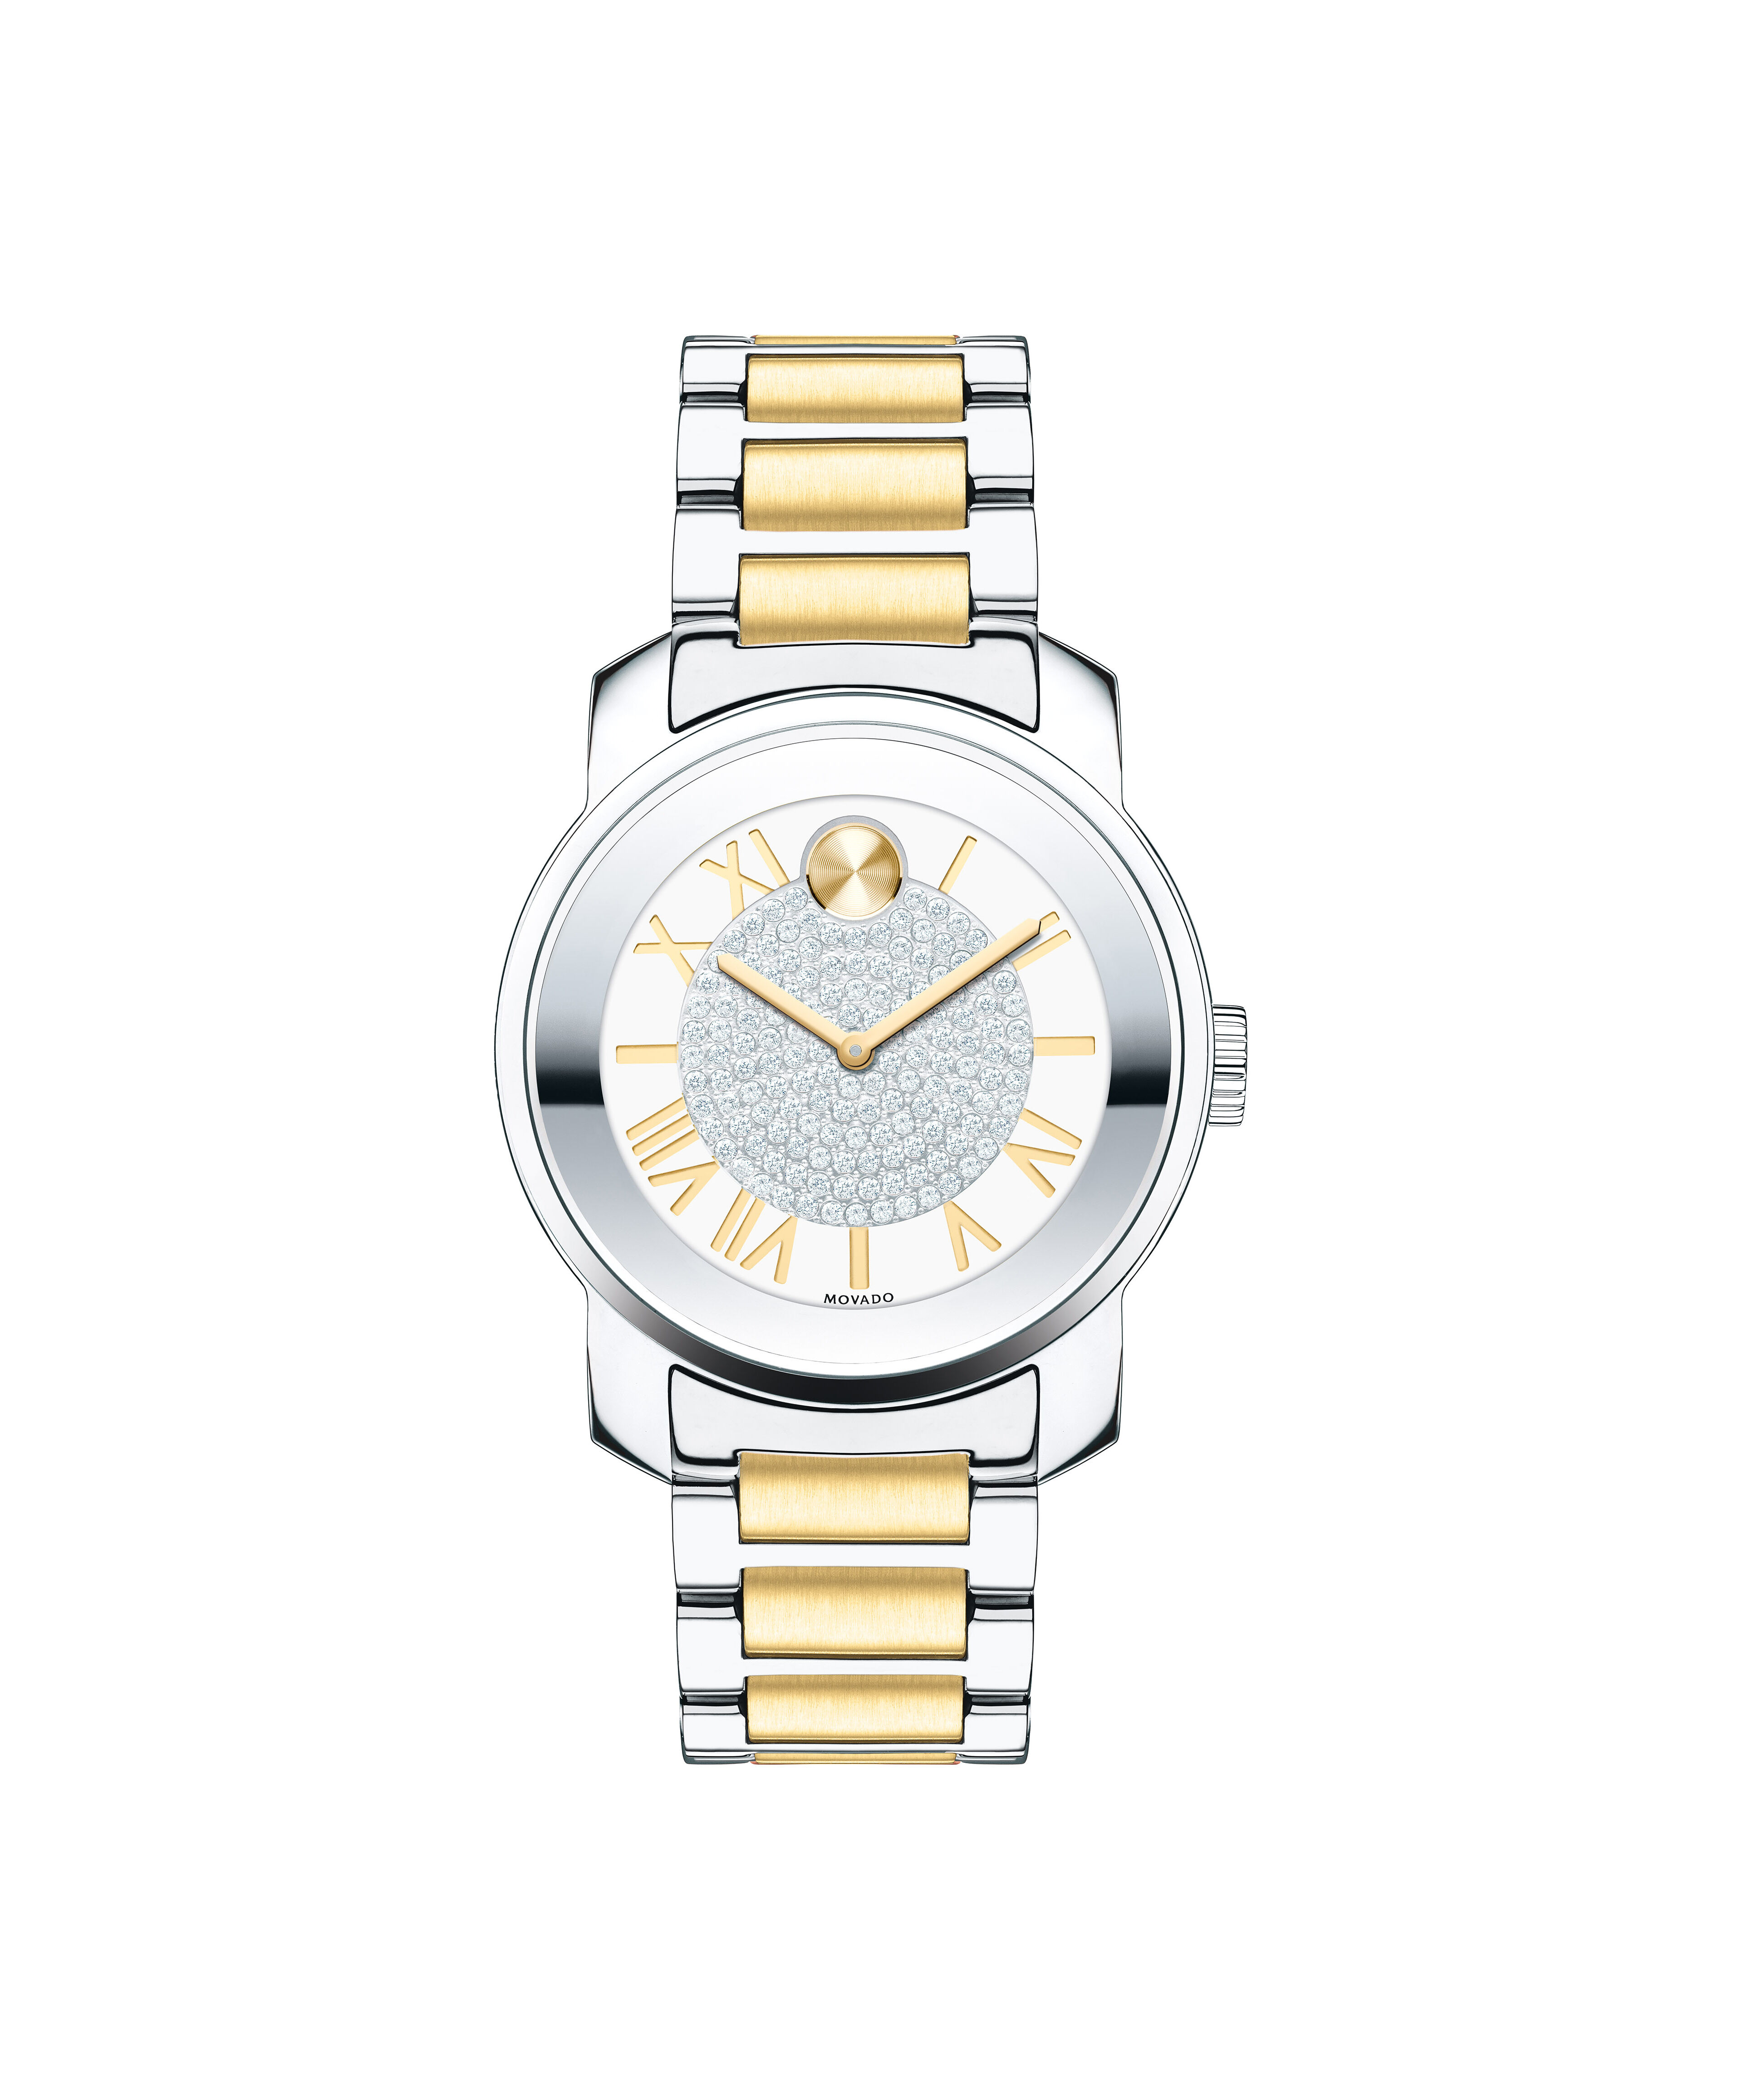 Best Website To Buy Fake Gold Watches Online